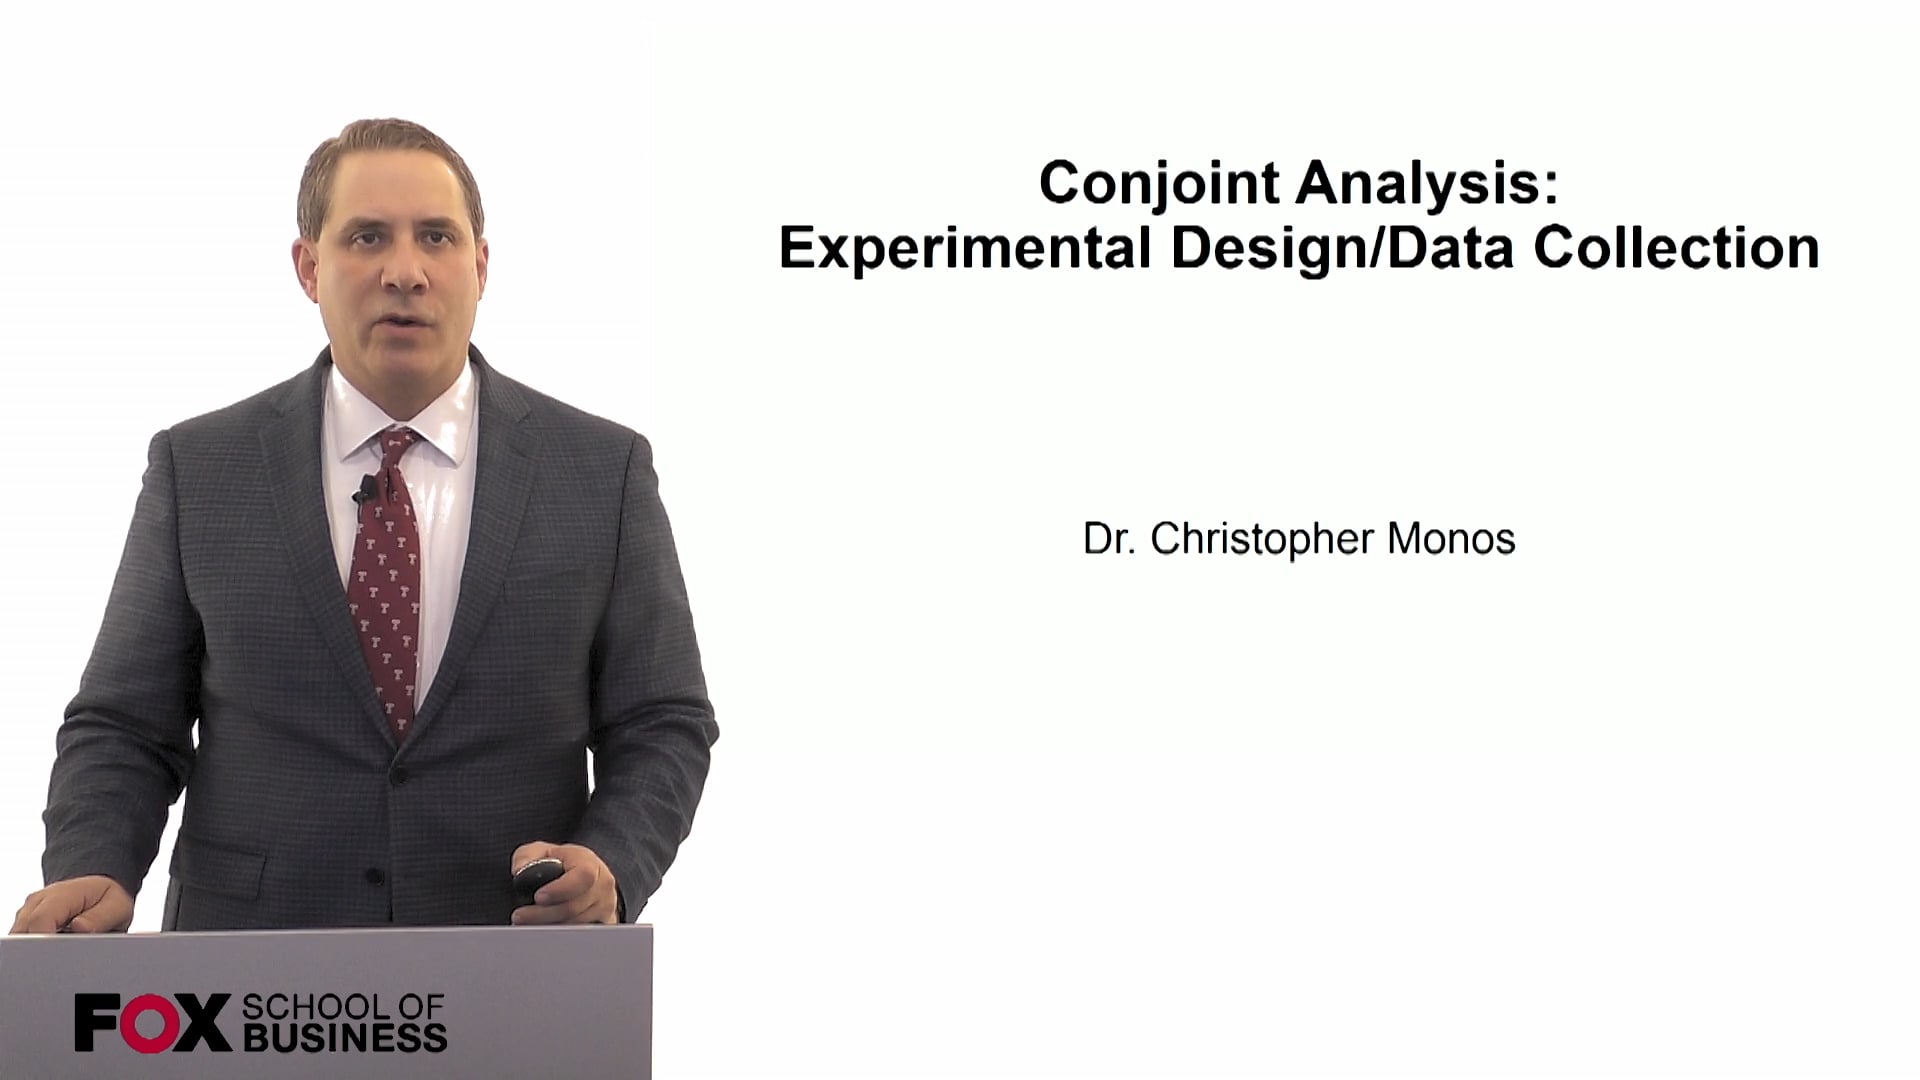 Conjoint Analysis: Experimental Design/Data Collection